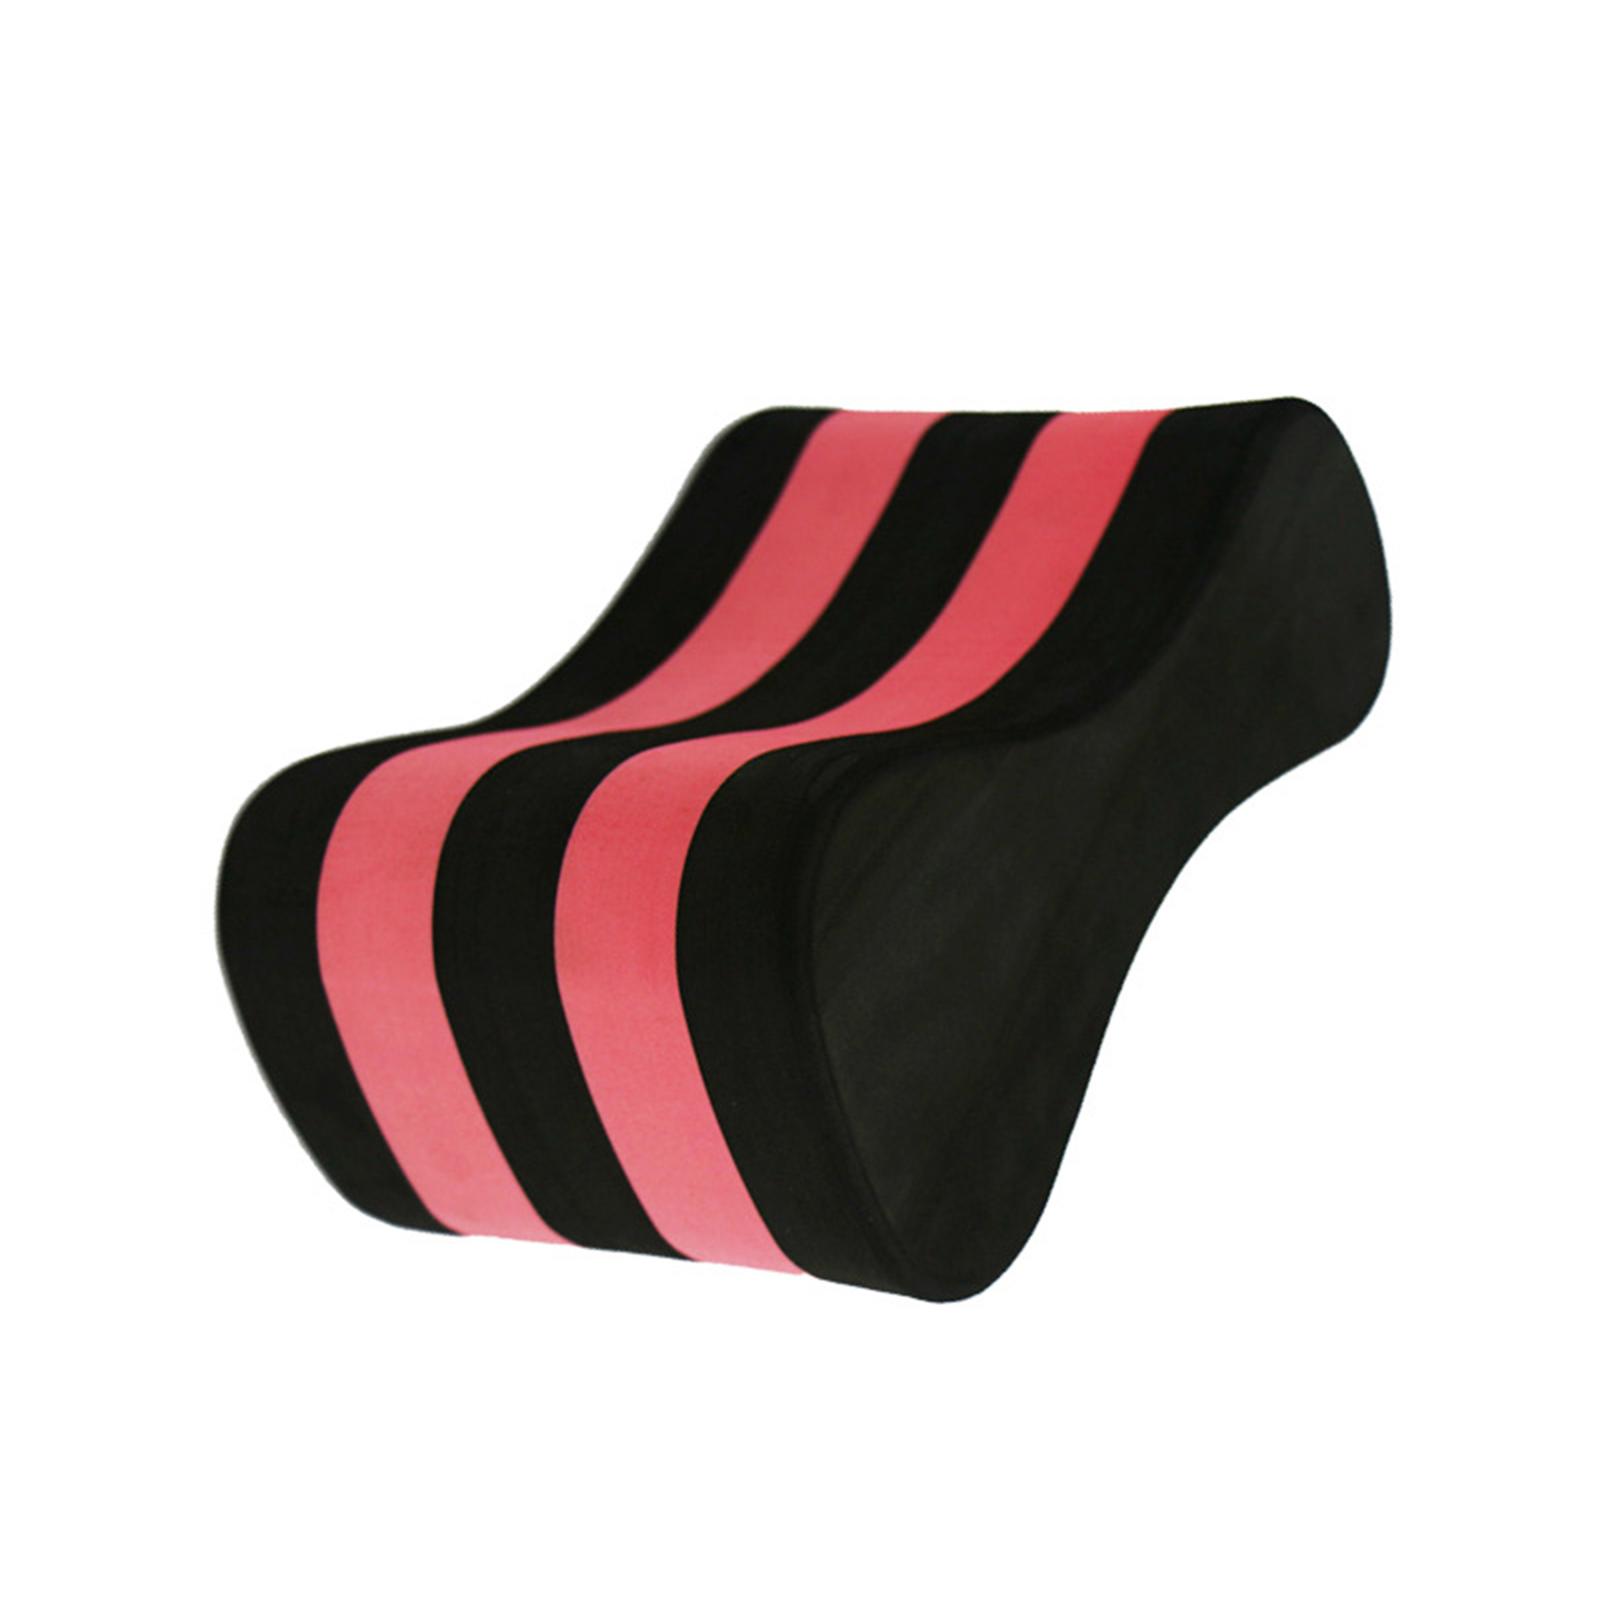 Foam Pull Float Legs and Hips Support Foam Pull Buoy for Swimming Beginners